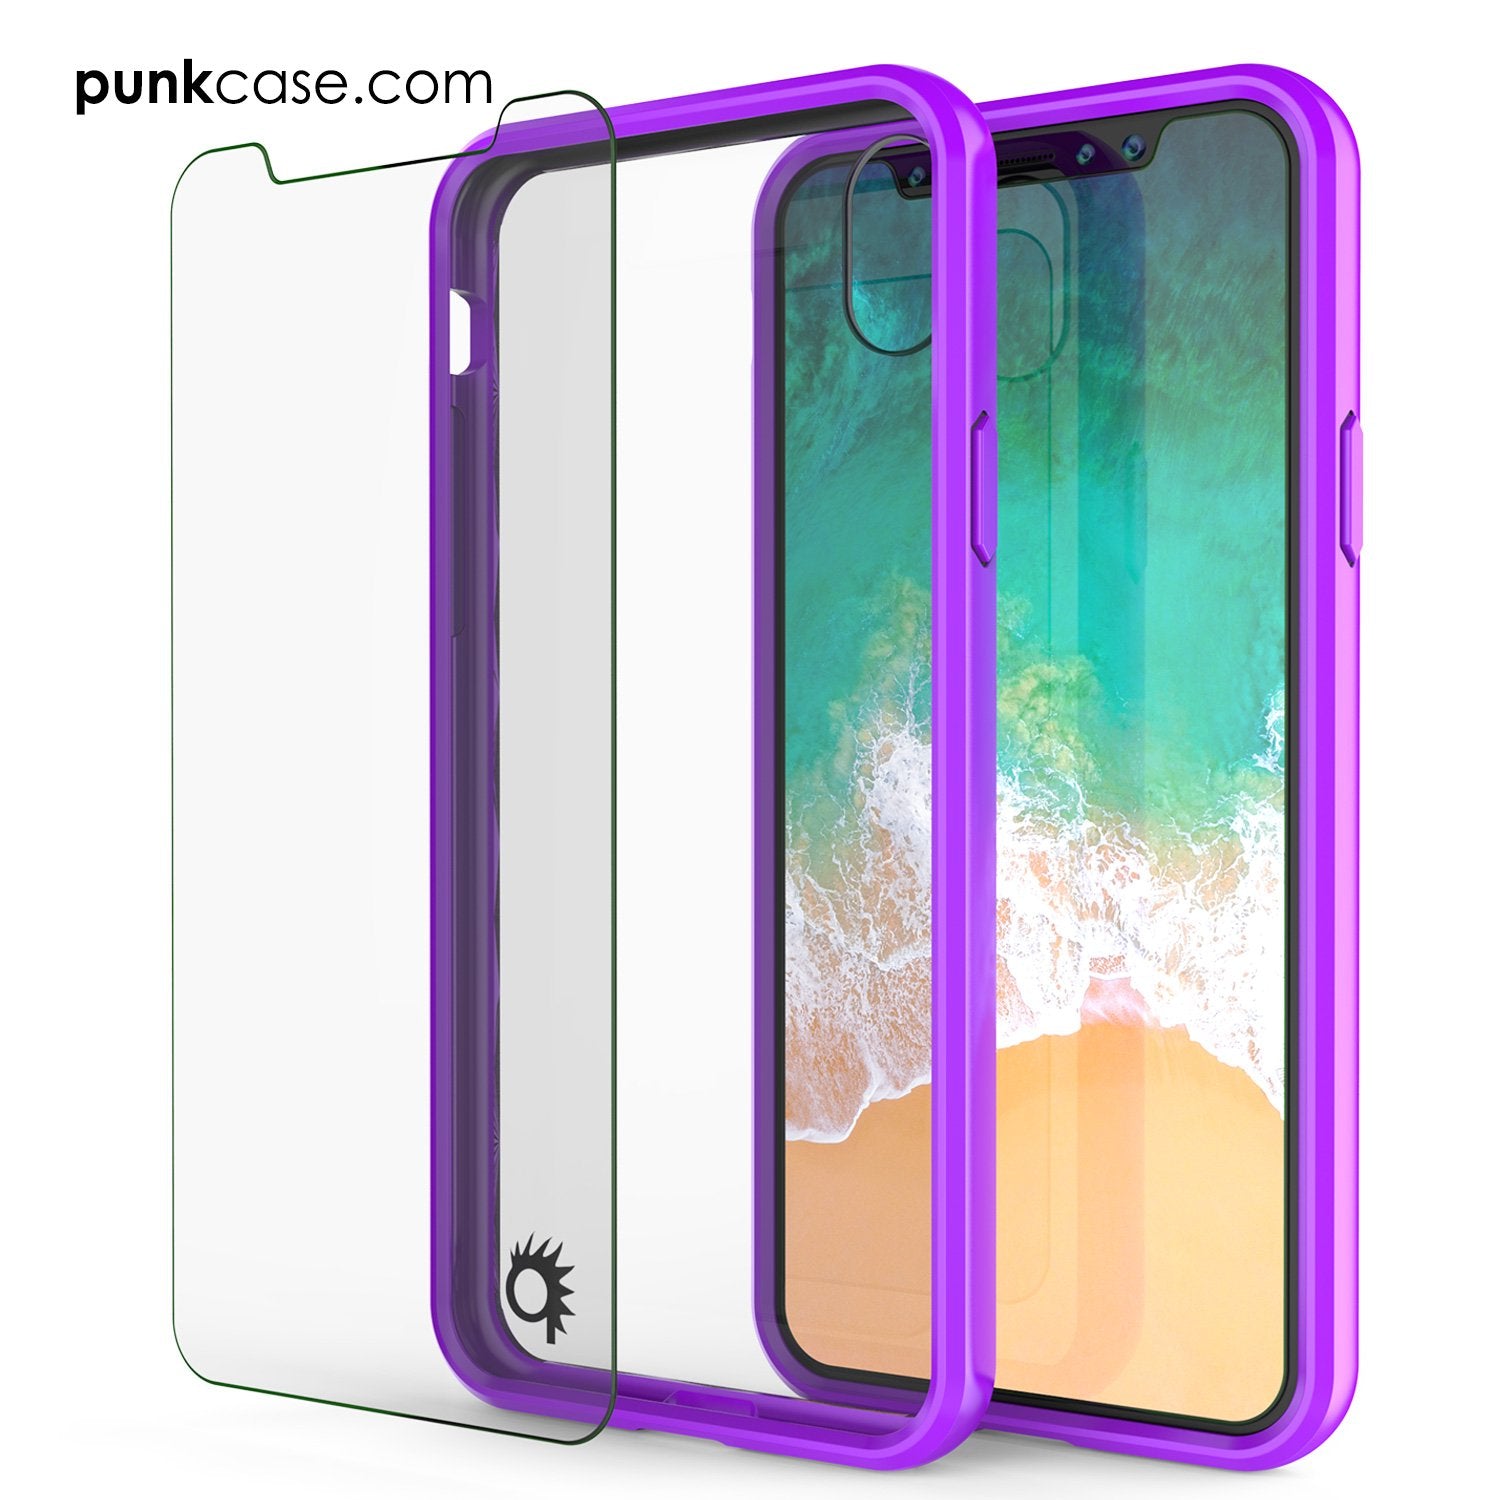 iPhone X Case, PUNKcase [LUCID 2.0 Series] [Slim Fit] Armor Cover W/Integrated Anti-Shock System & Tempered Glass PUNKSHIELD Screen Protector [Purple]